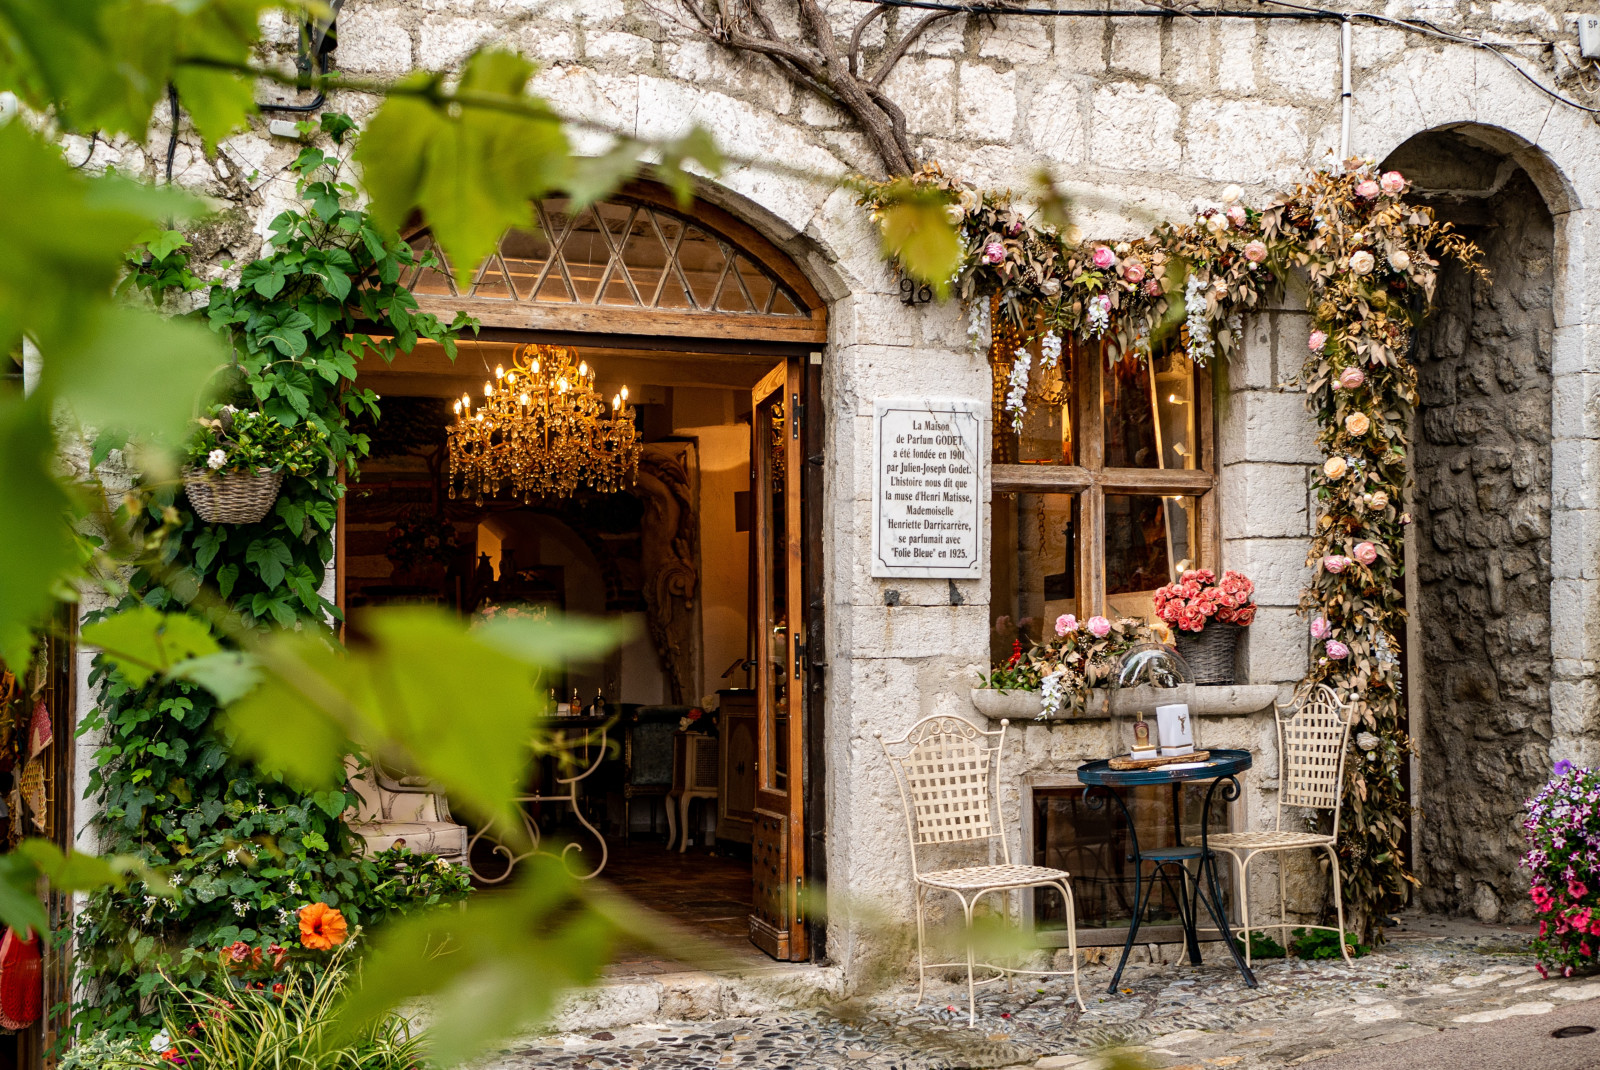 Charming cafe on a cobblestone street in the South of France. 